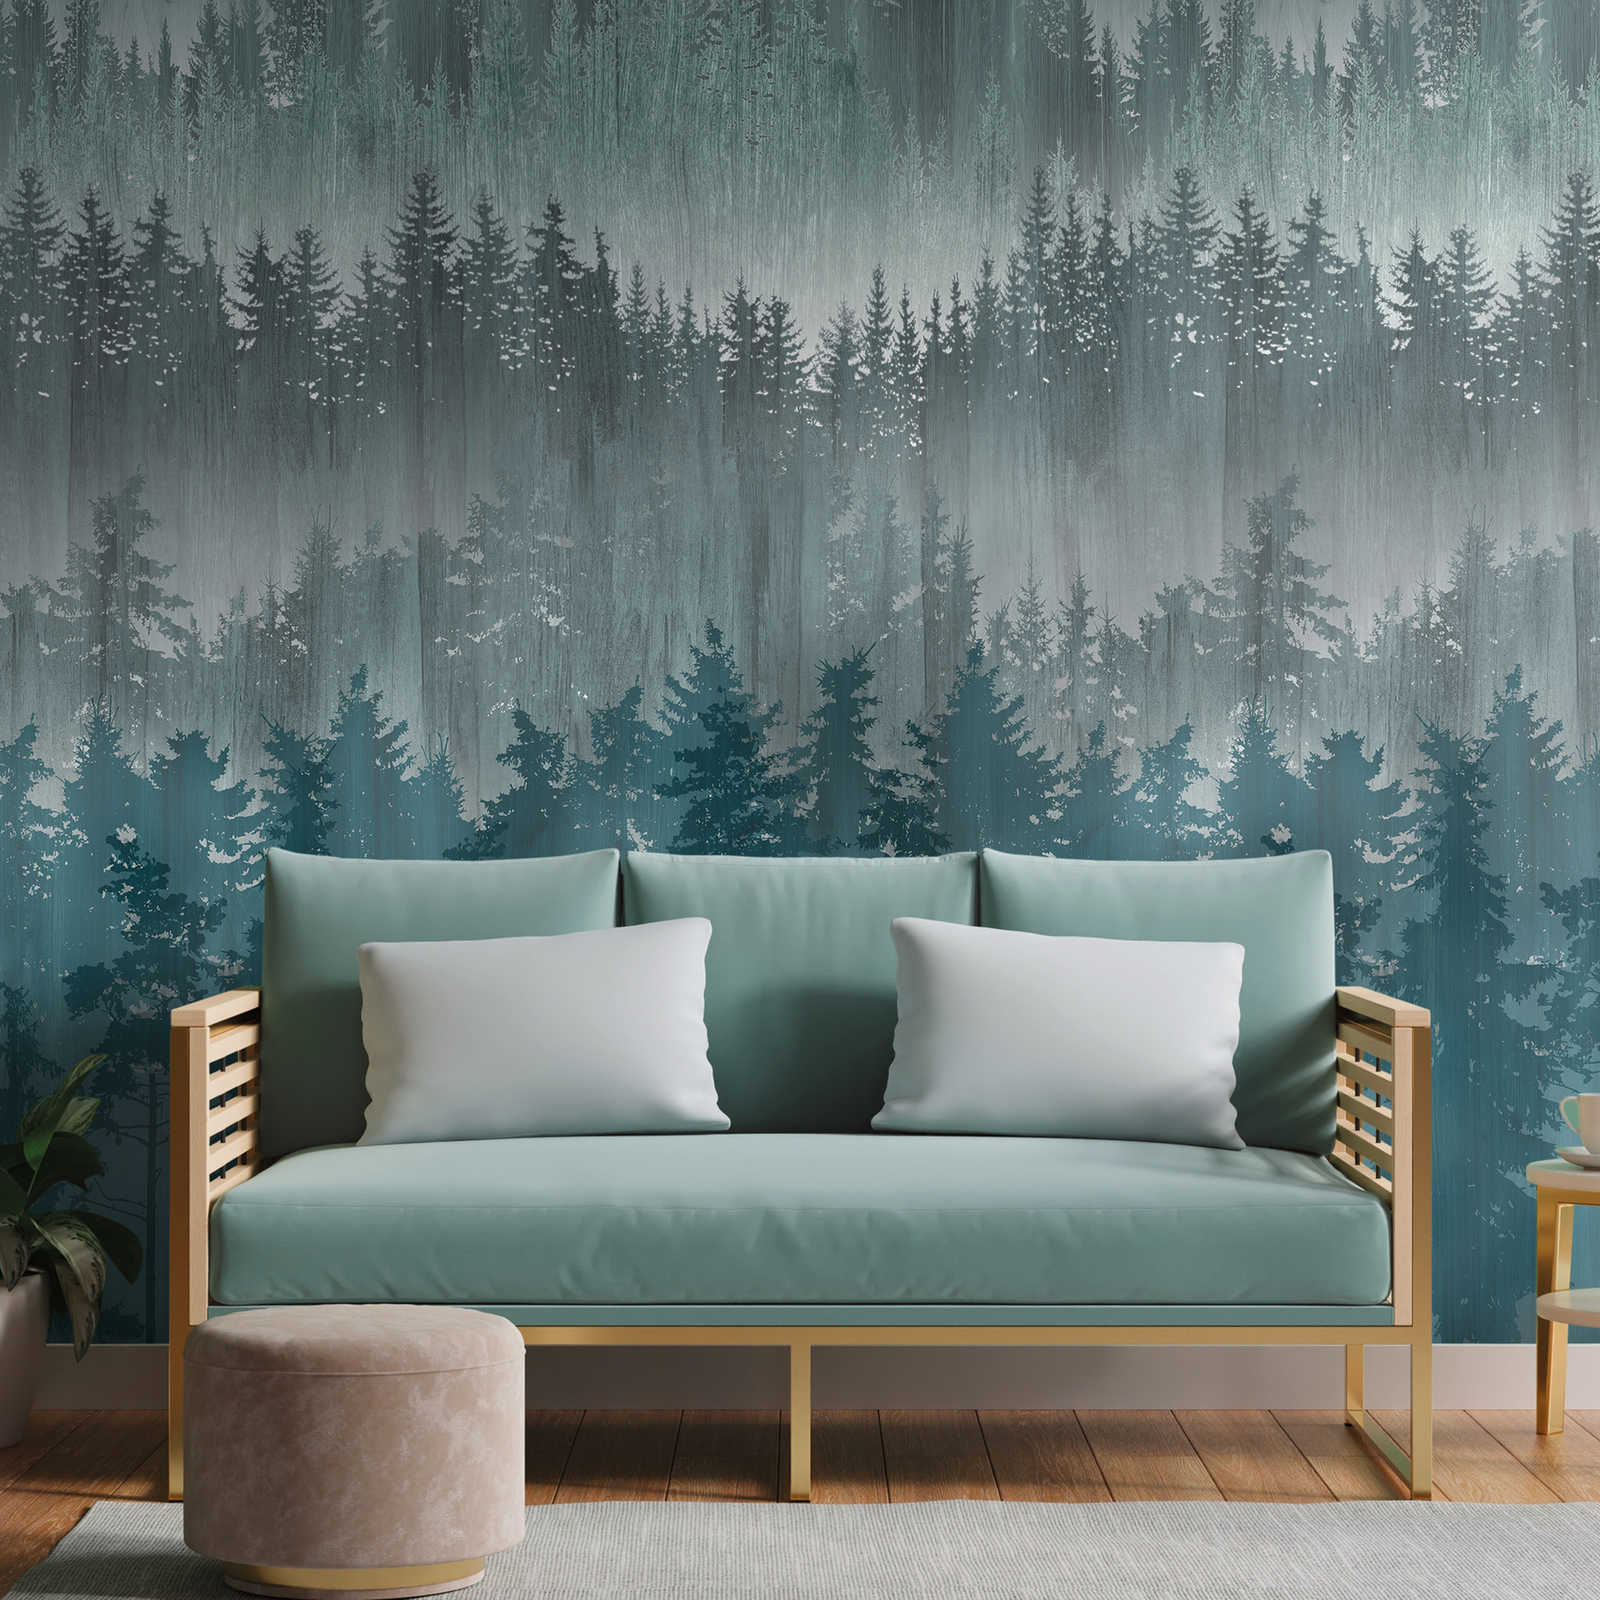         Non-woven wallpaper with abstract forest pattern - blue, grey, petrol
    